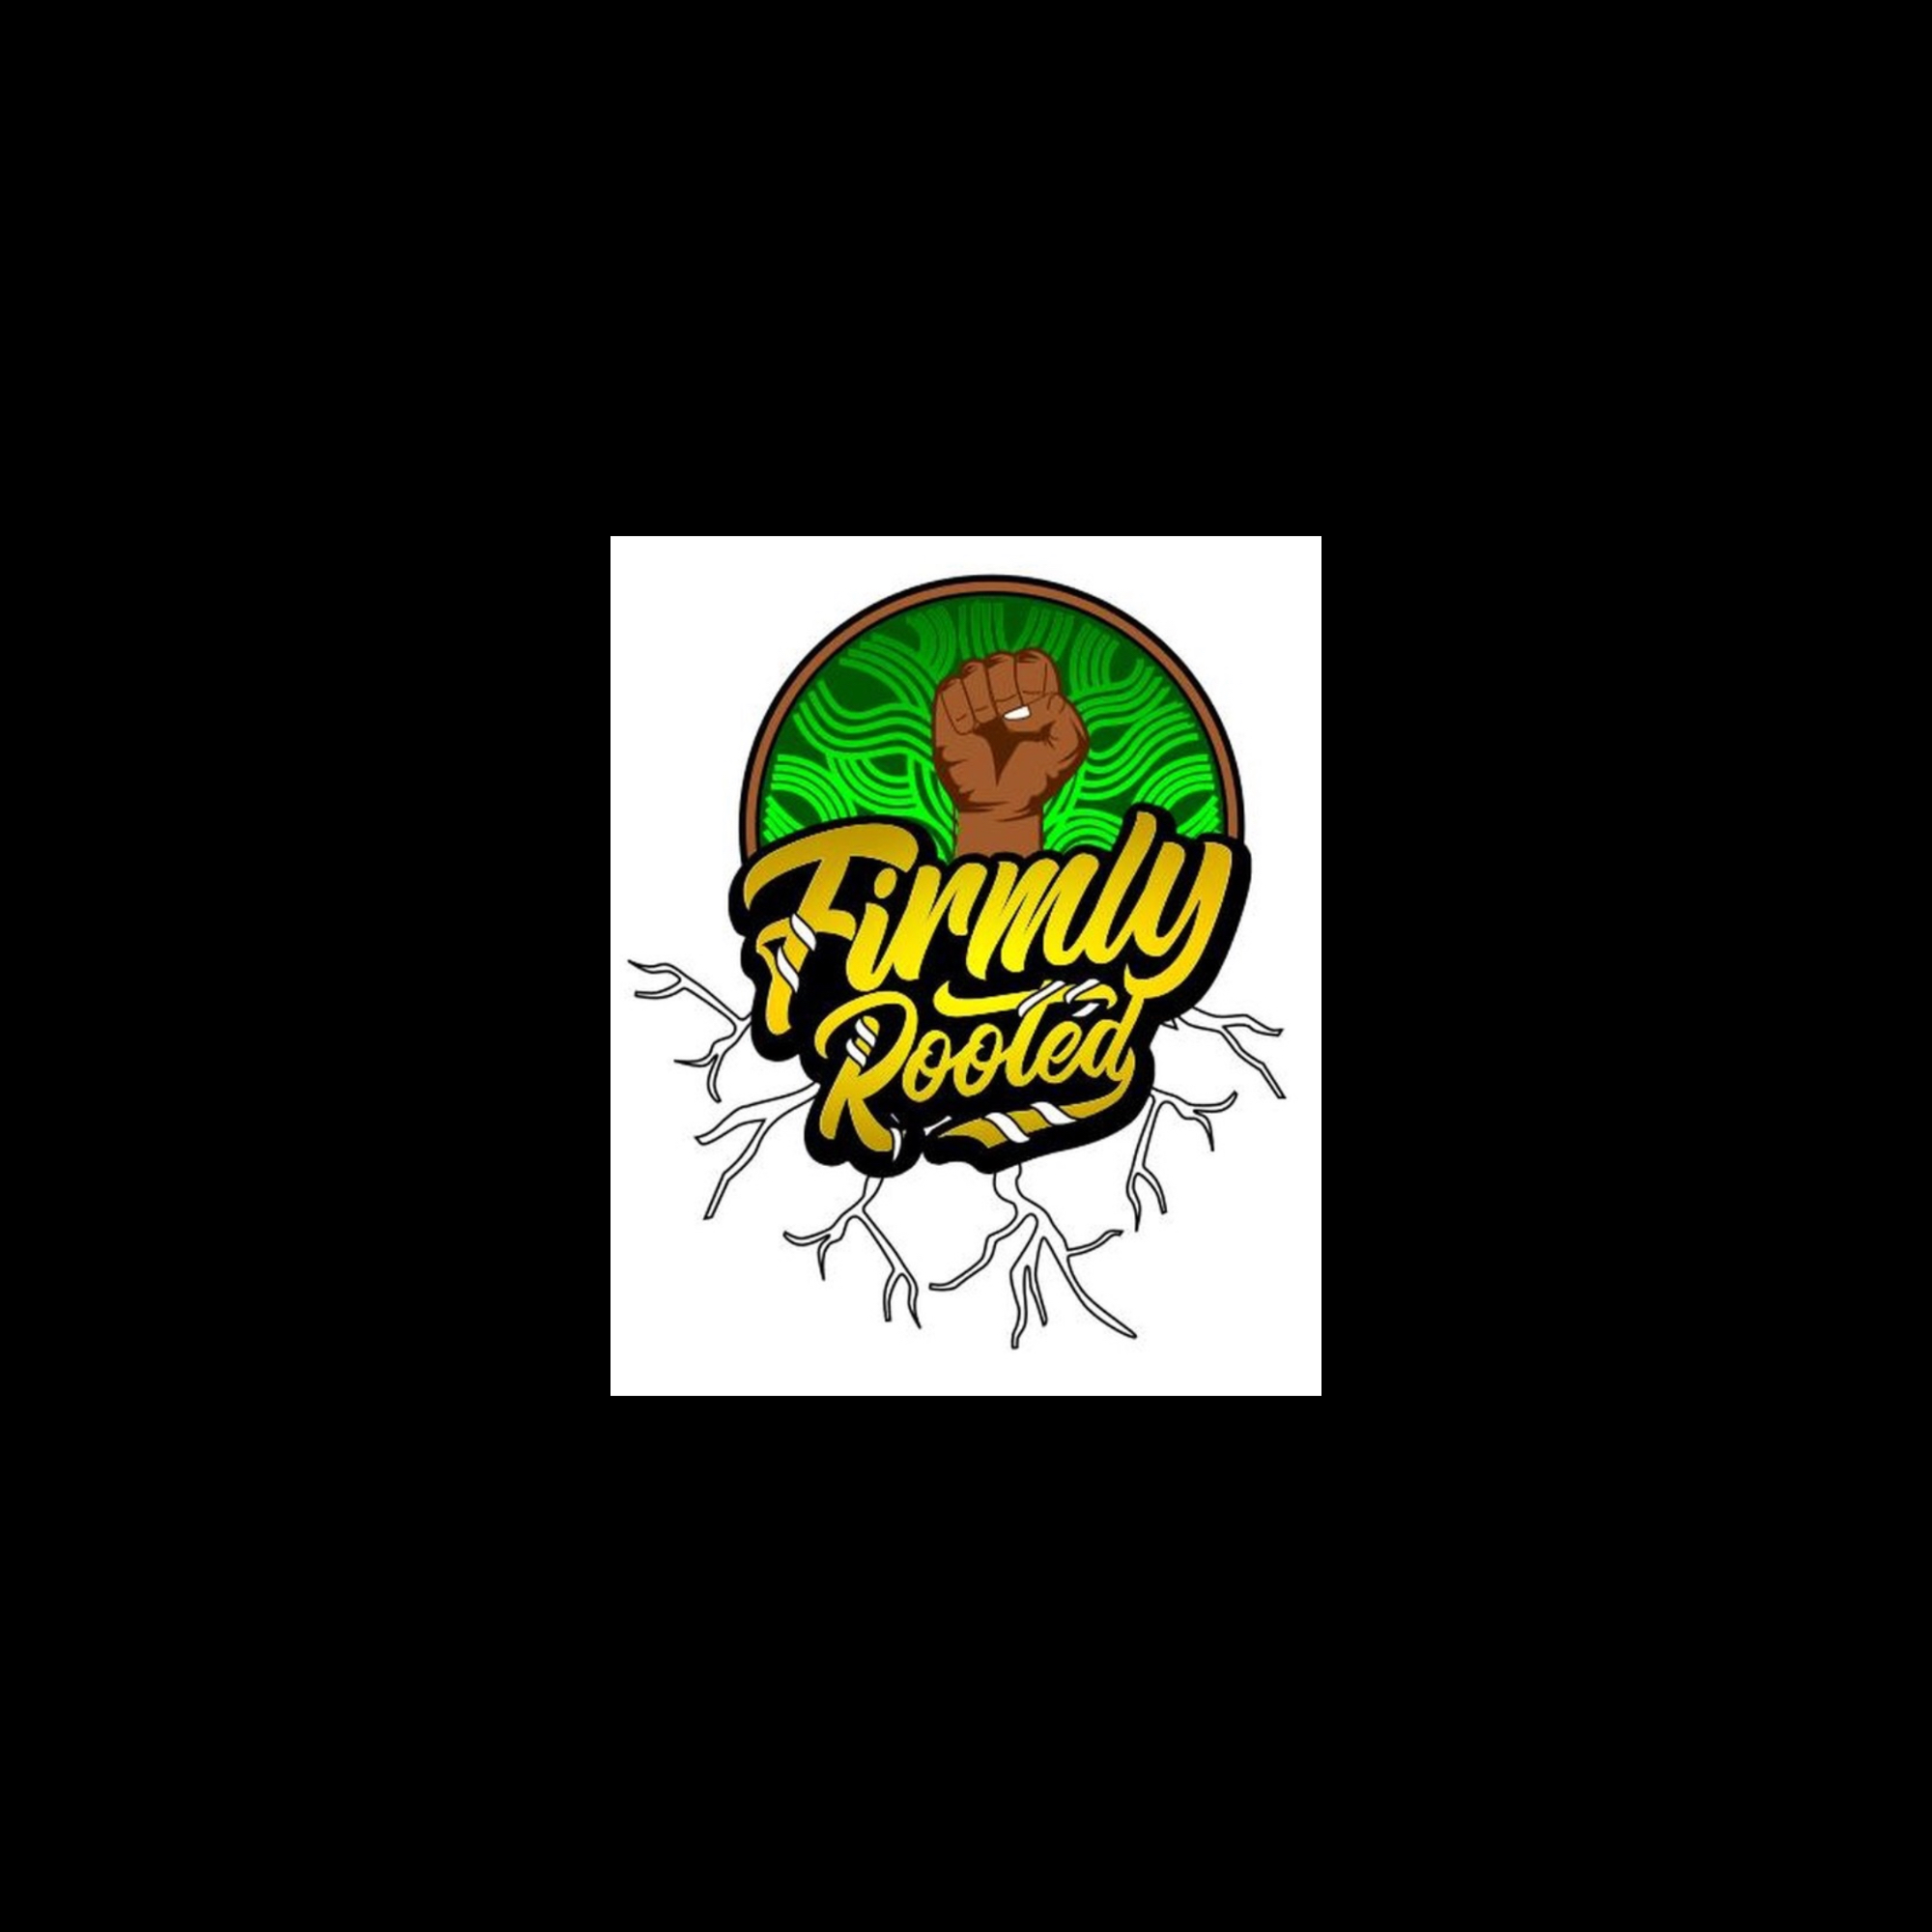 The official logo of Firmly Rooted Eoydc